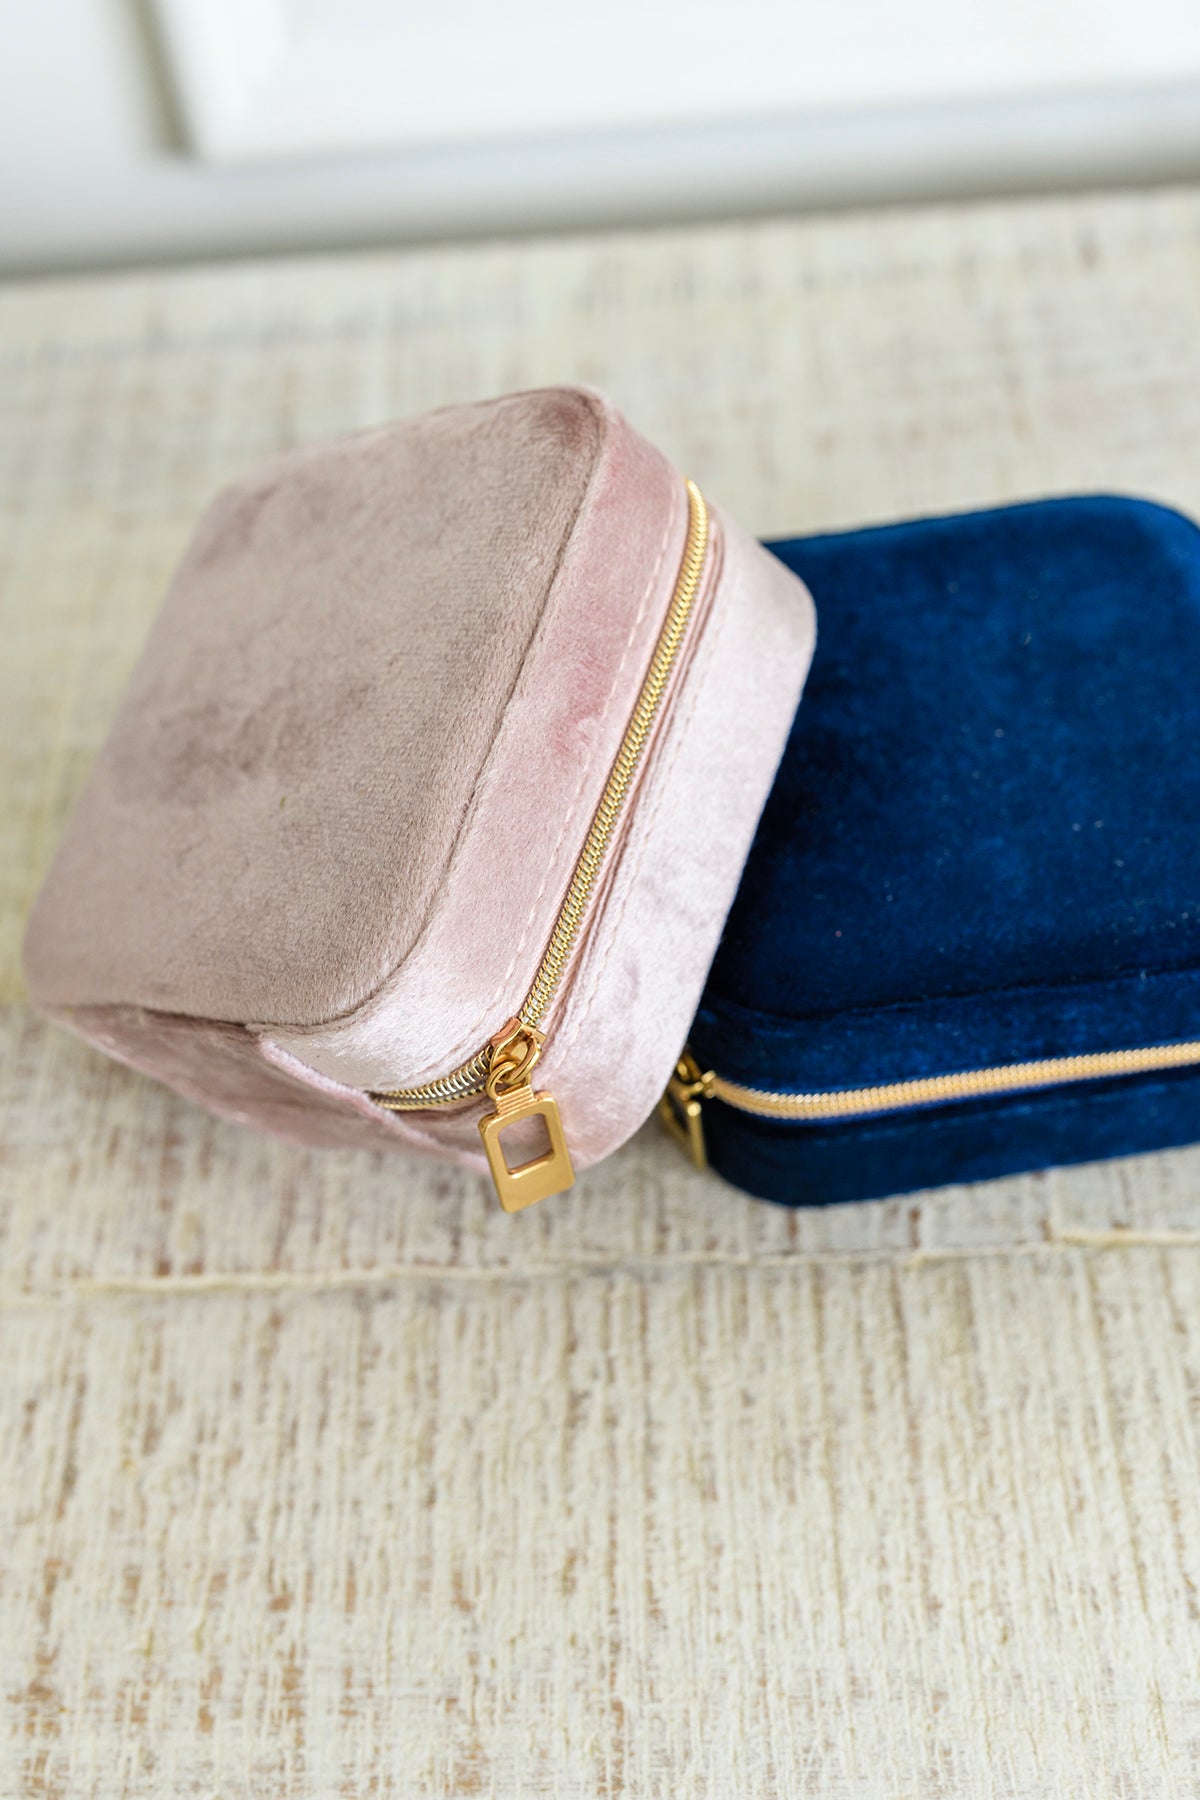 Kept and Carried Velvet Jewelry Box in Navy - 3/14/2023